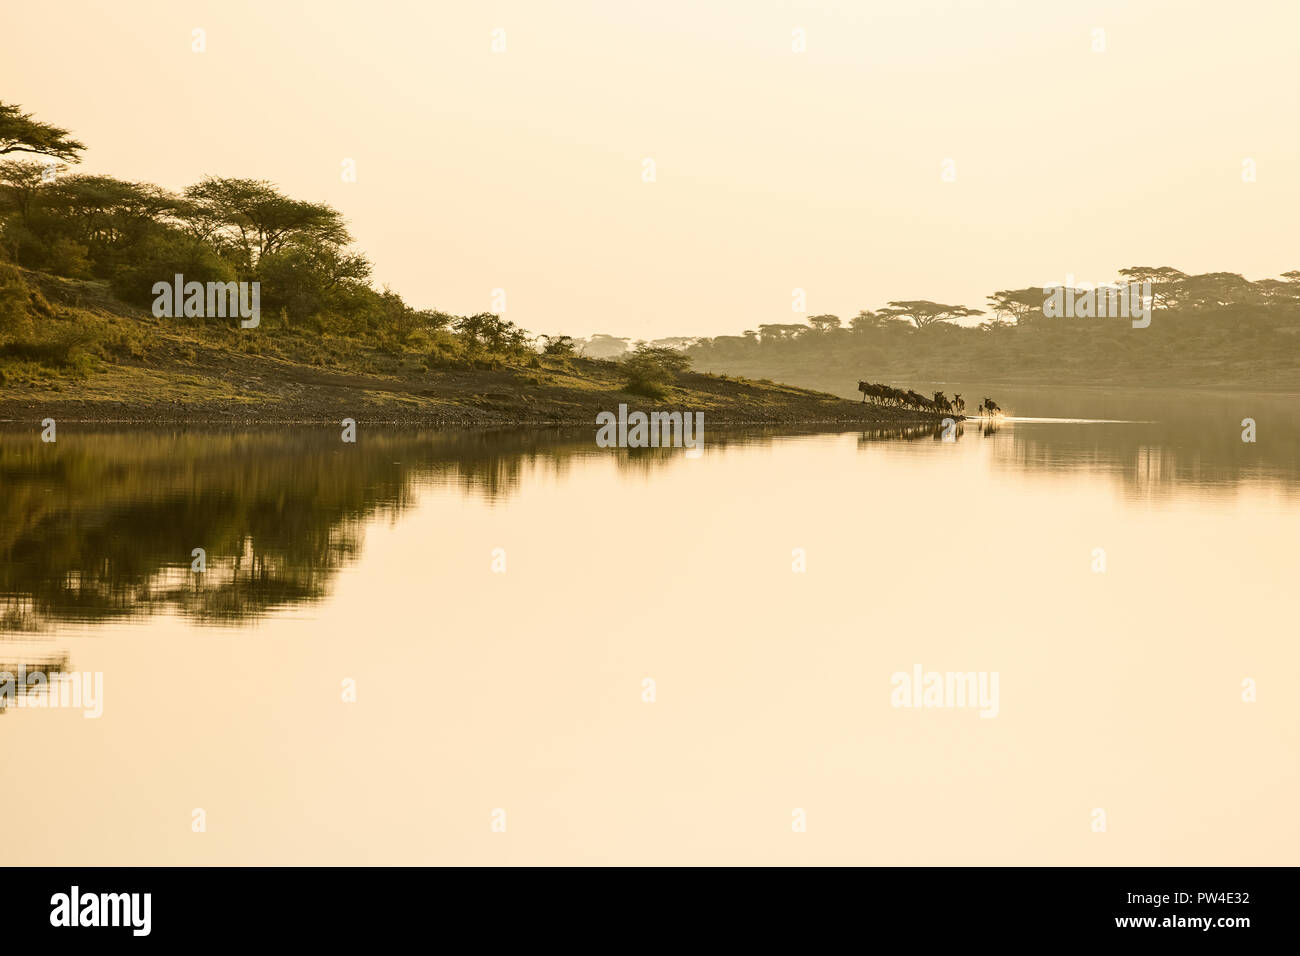 Mid distance view of wildebeests walking on hill from lake against clear sky at Maasai Mara National Reserve during sunset Stock Photo